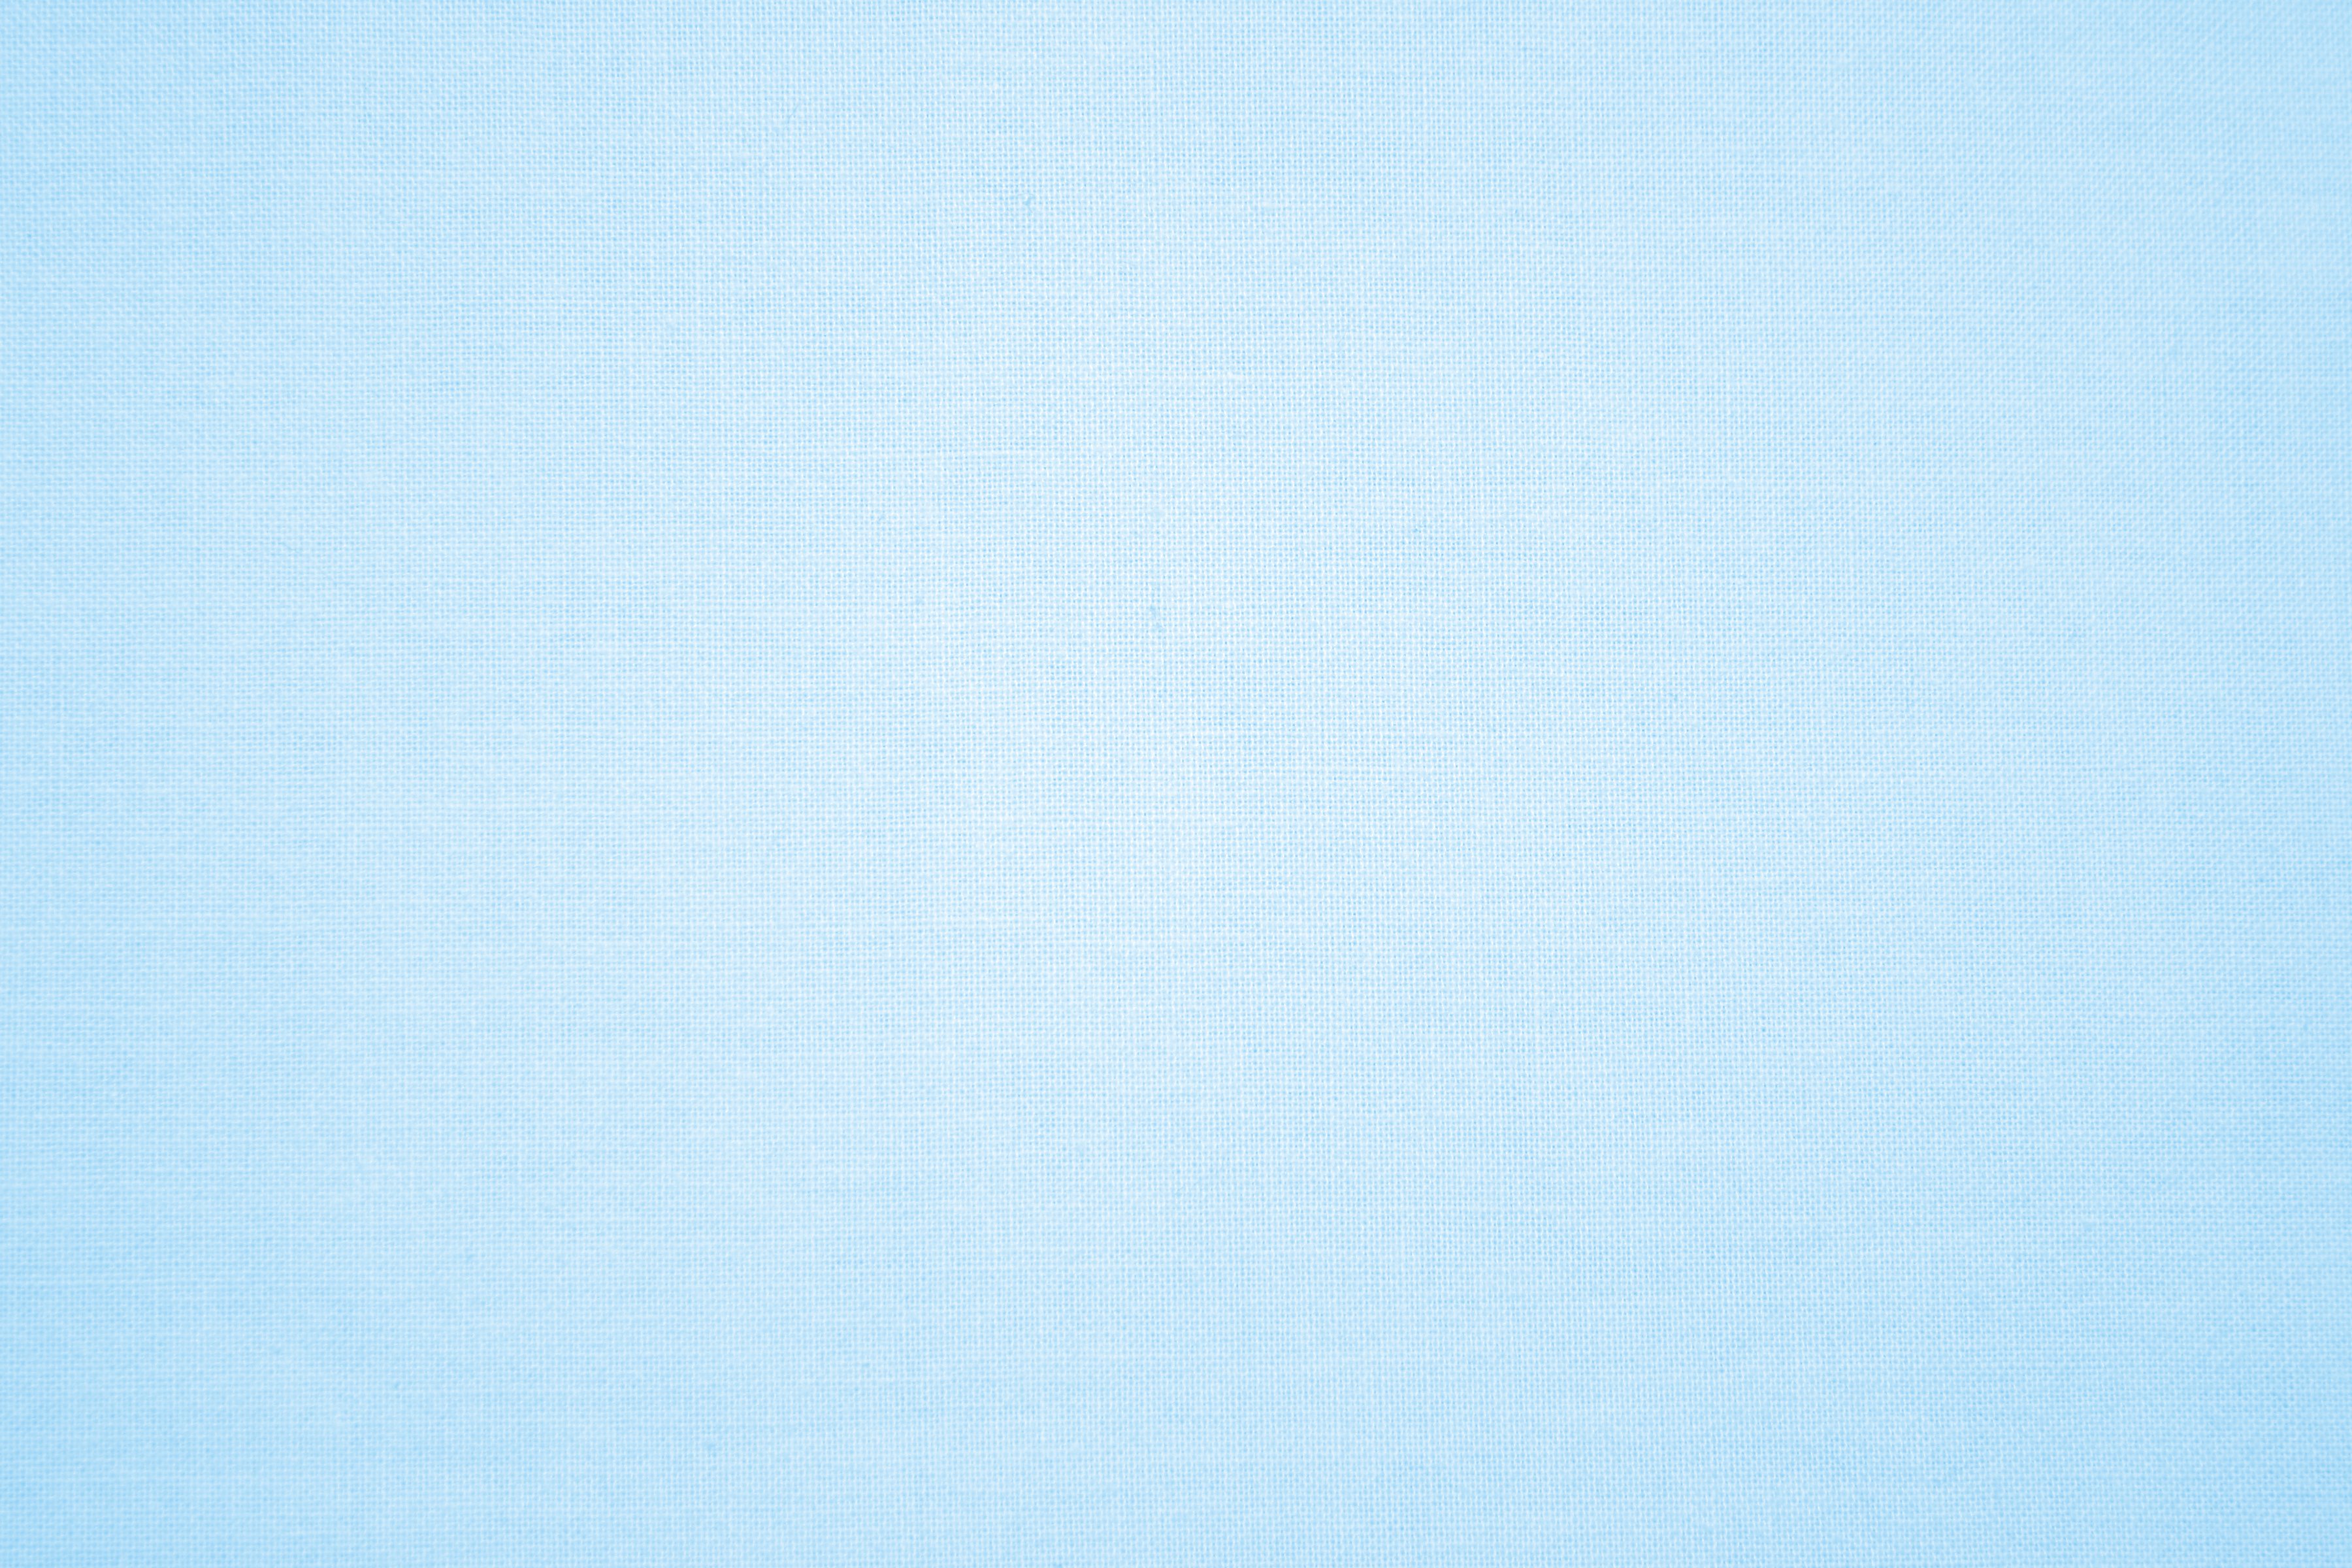 Baby Blue Canvas Fabric Texture Picture Free Photograph Photos